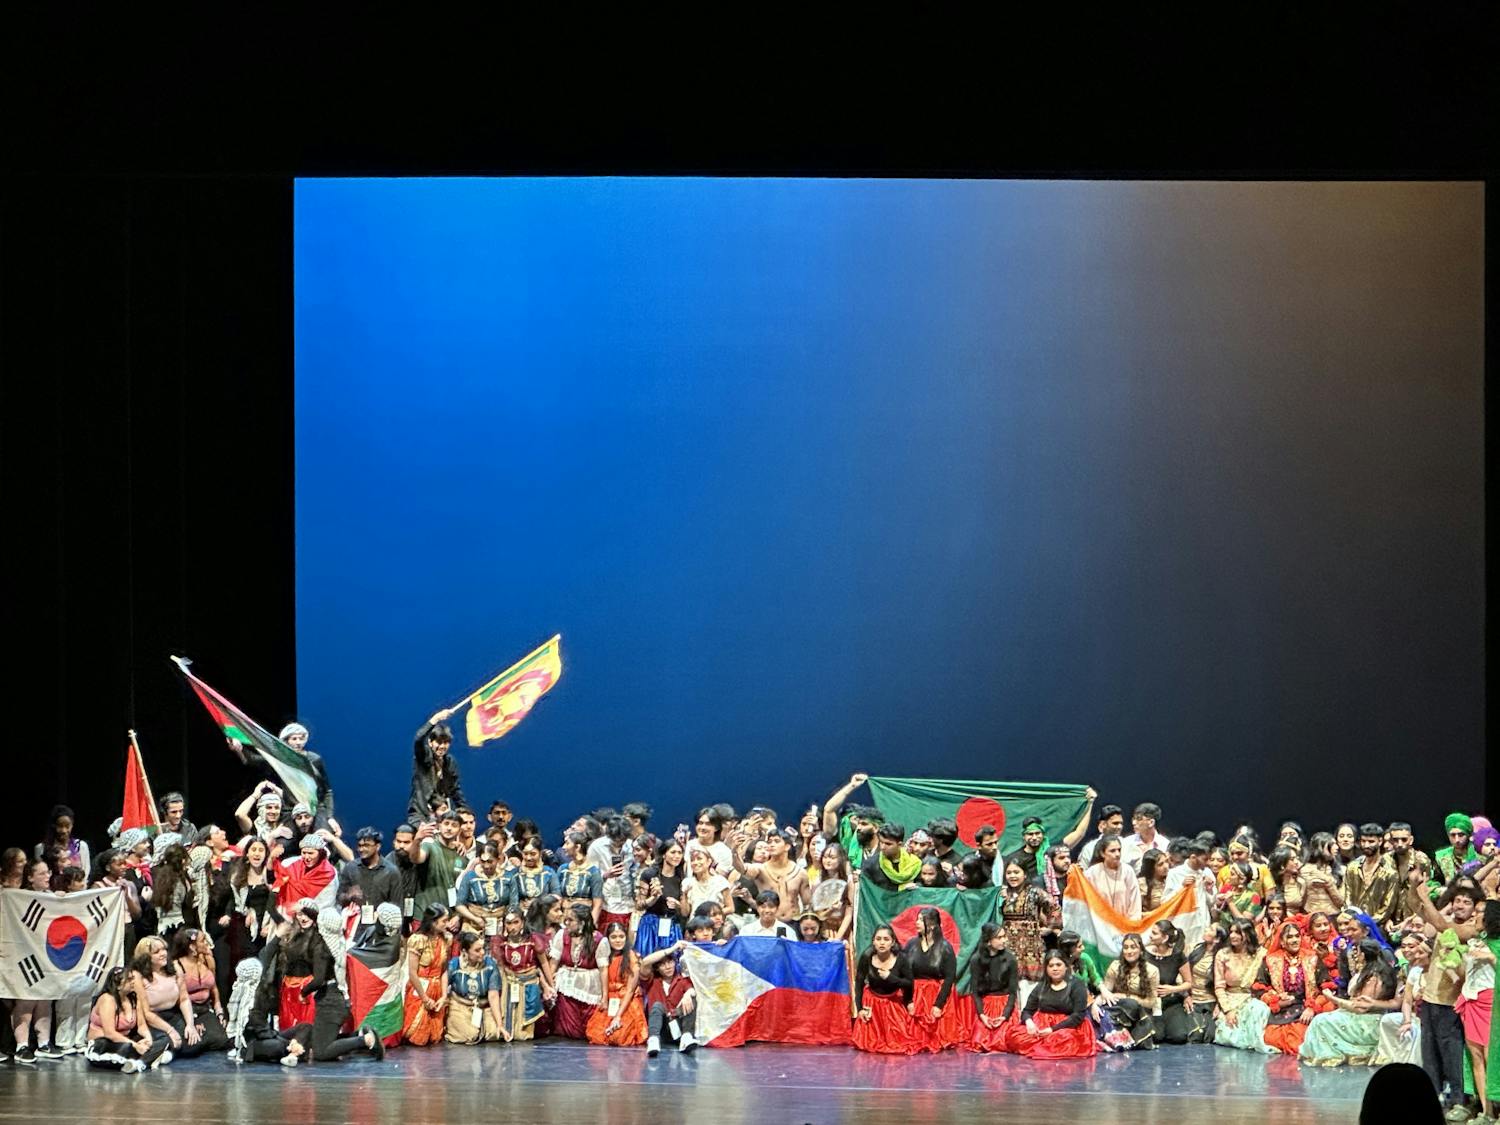 UB student dance groups performed during International Fiesta this past weekend.